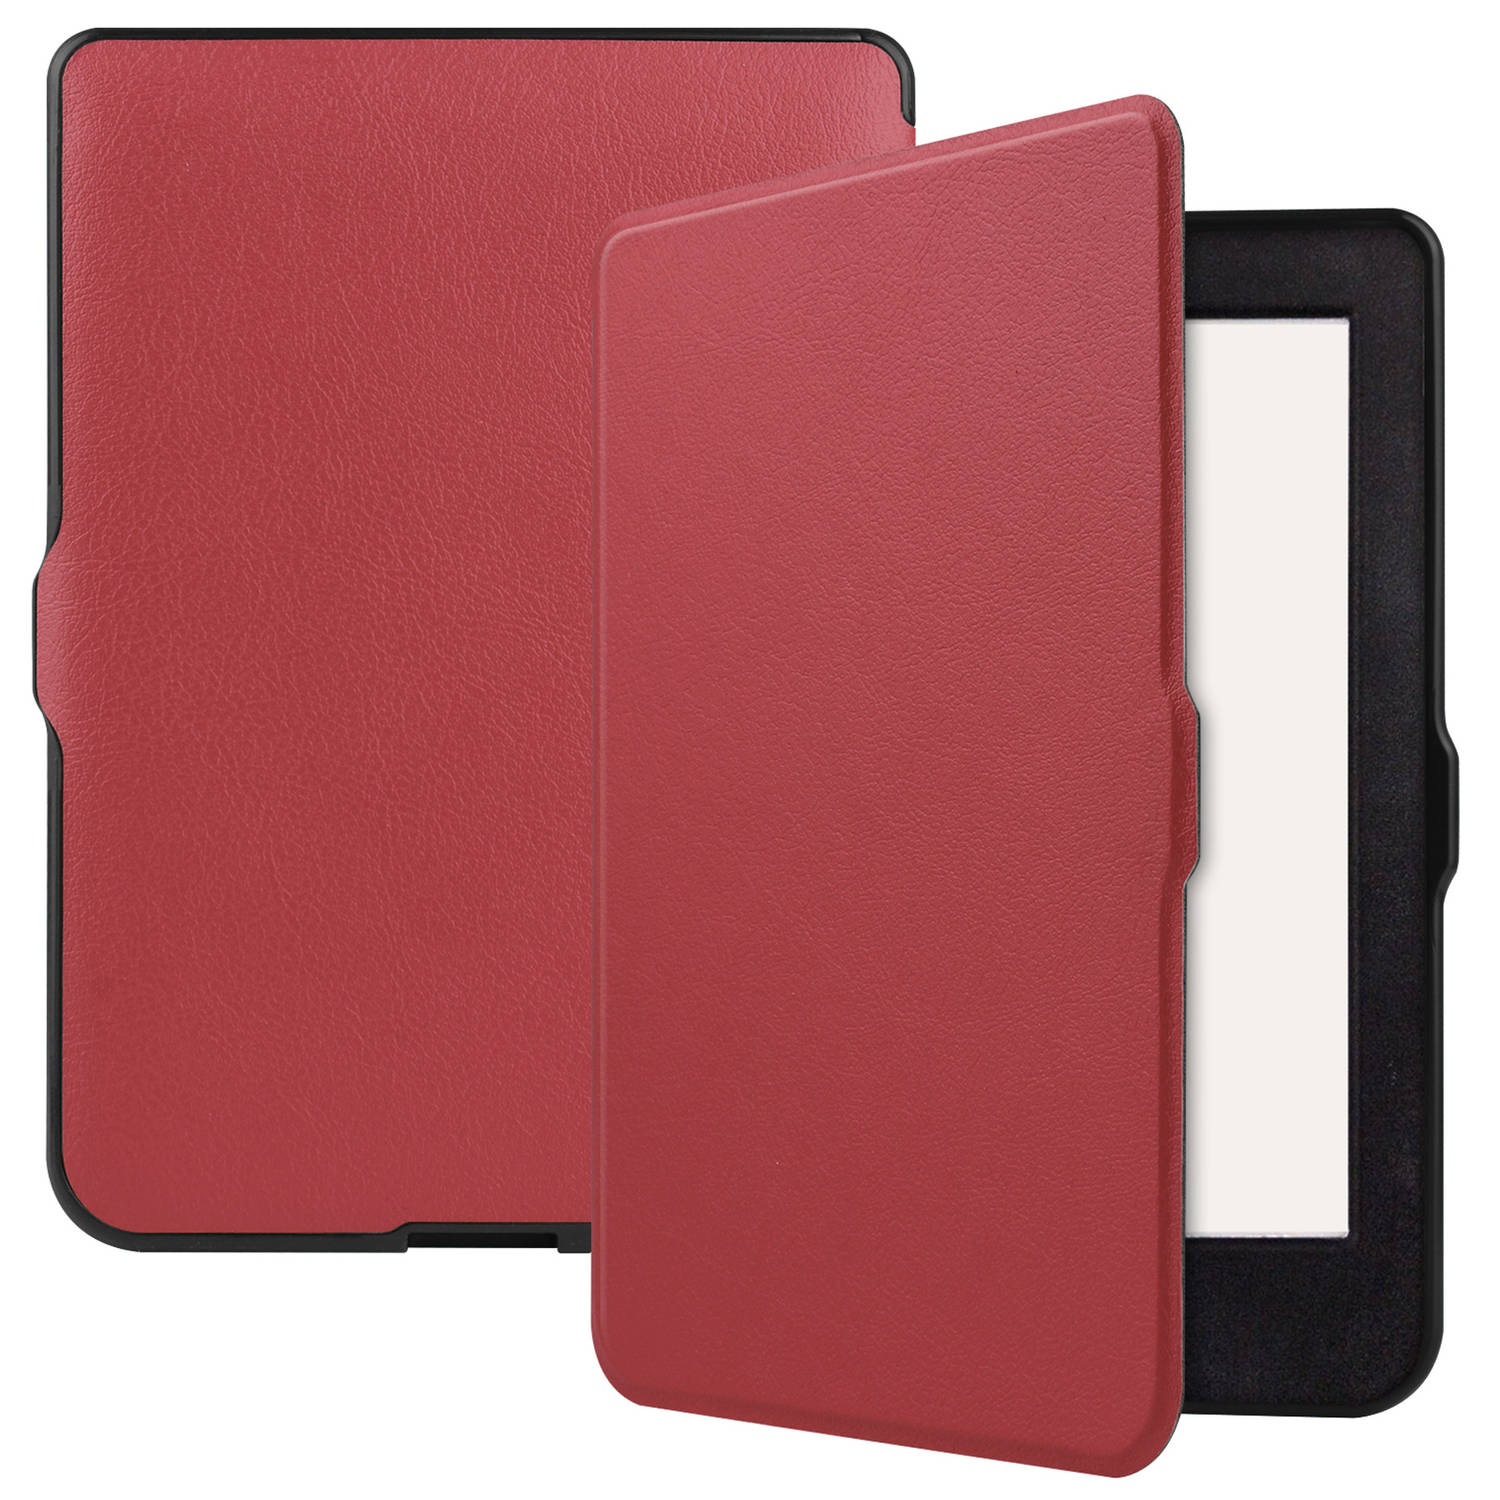 Basey Kobo Nia Hoesje Bookcase Cover Hoes - Kobo Nia Case Cover Hoes - Donker Rood